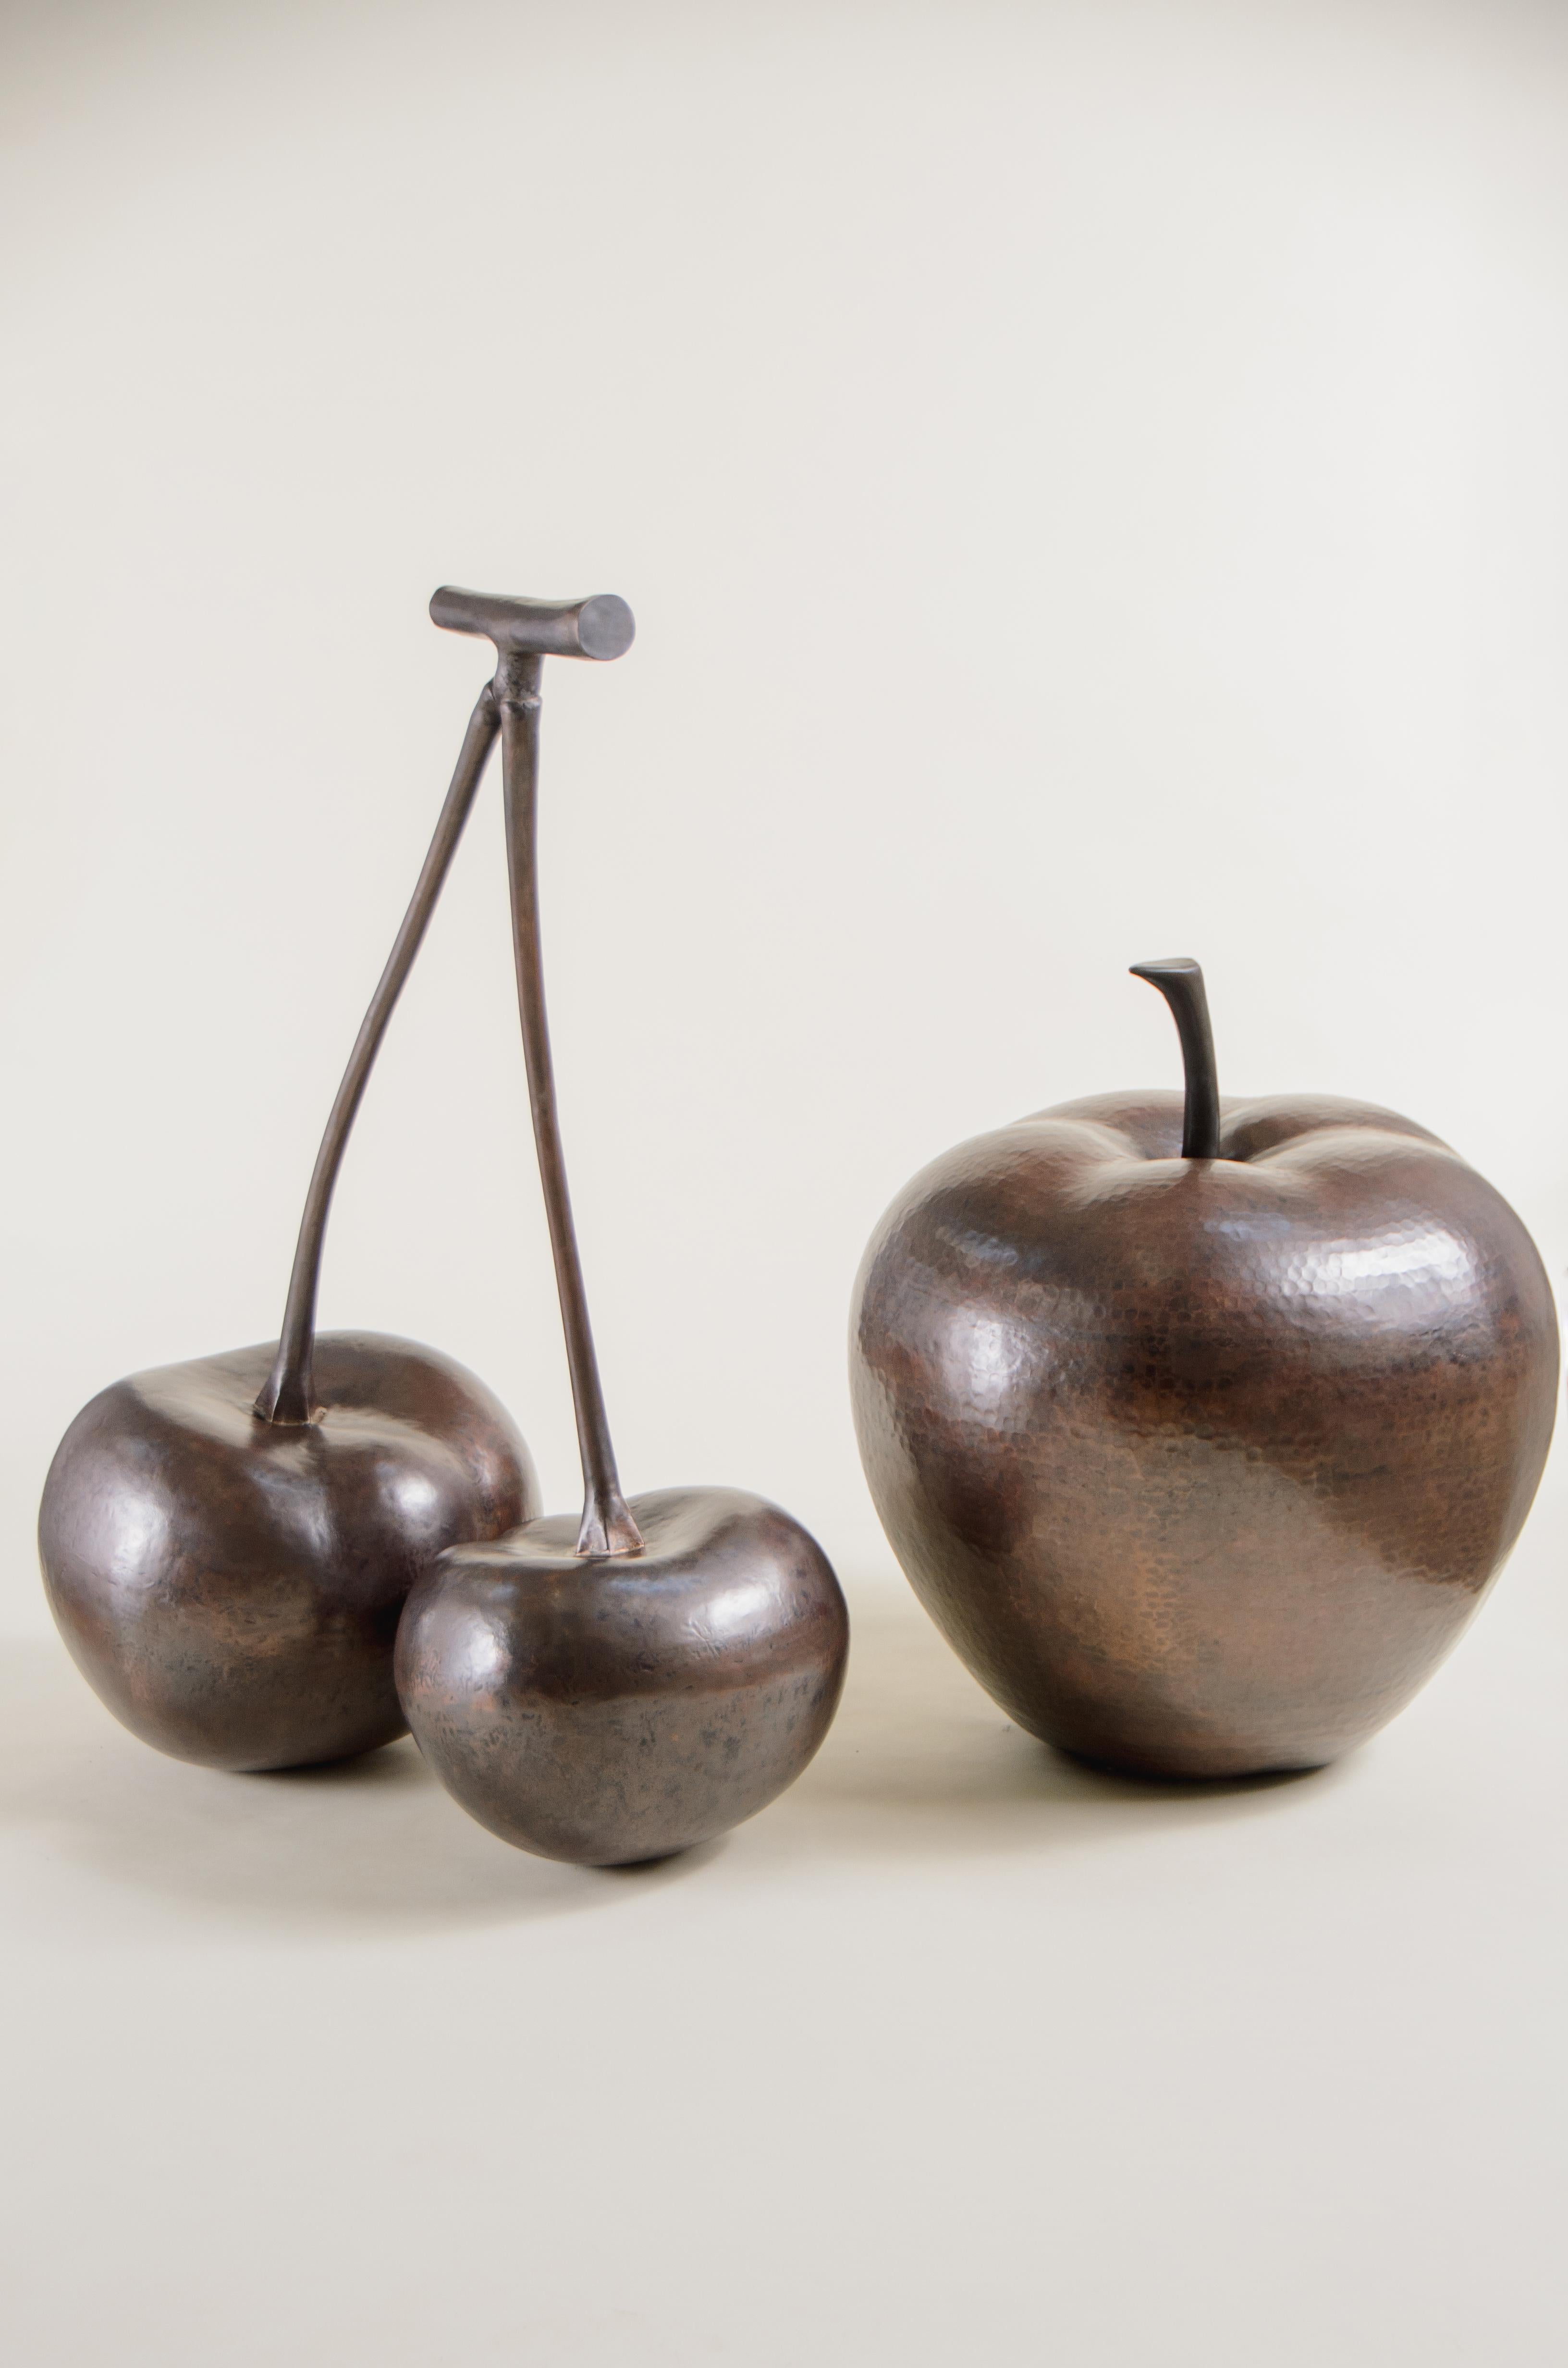 Hammered Contemporary Copper Apple Sculpture by Robert Kuo, Repoussé, Limited Edition For Sale